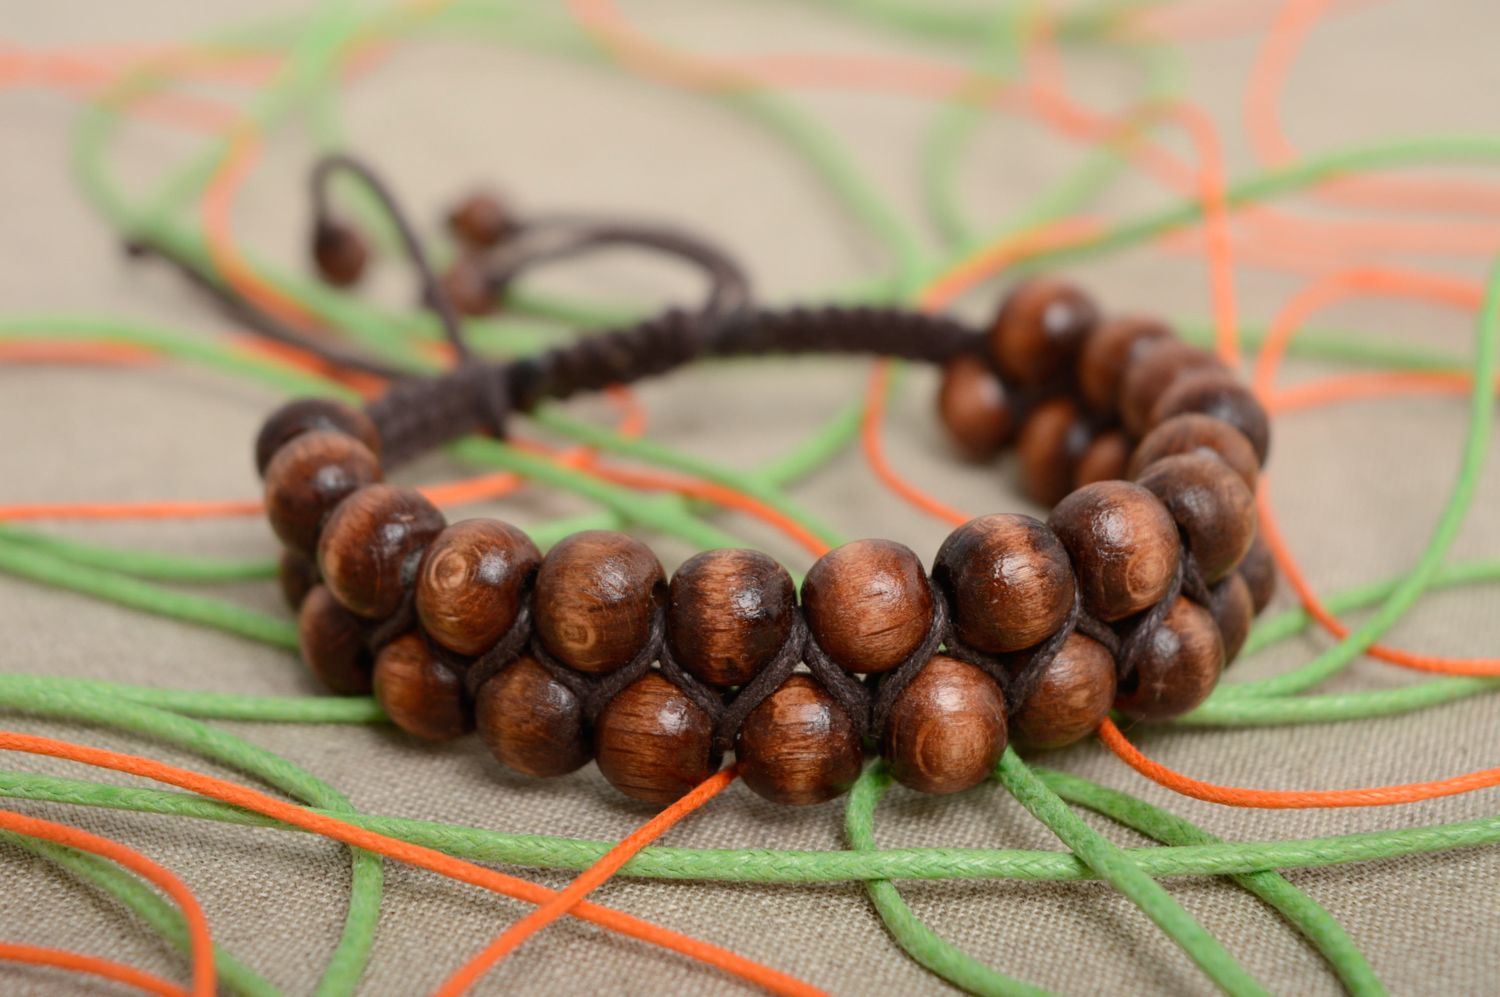 Unusual brown bracelet made of cord and beads photo 2